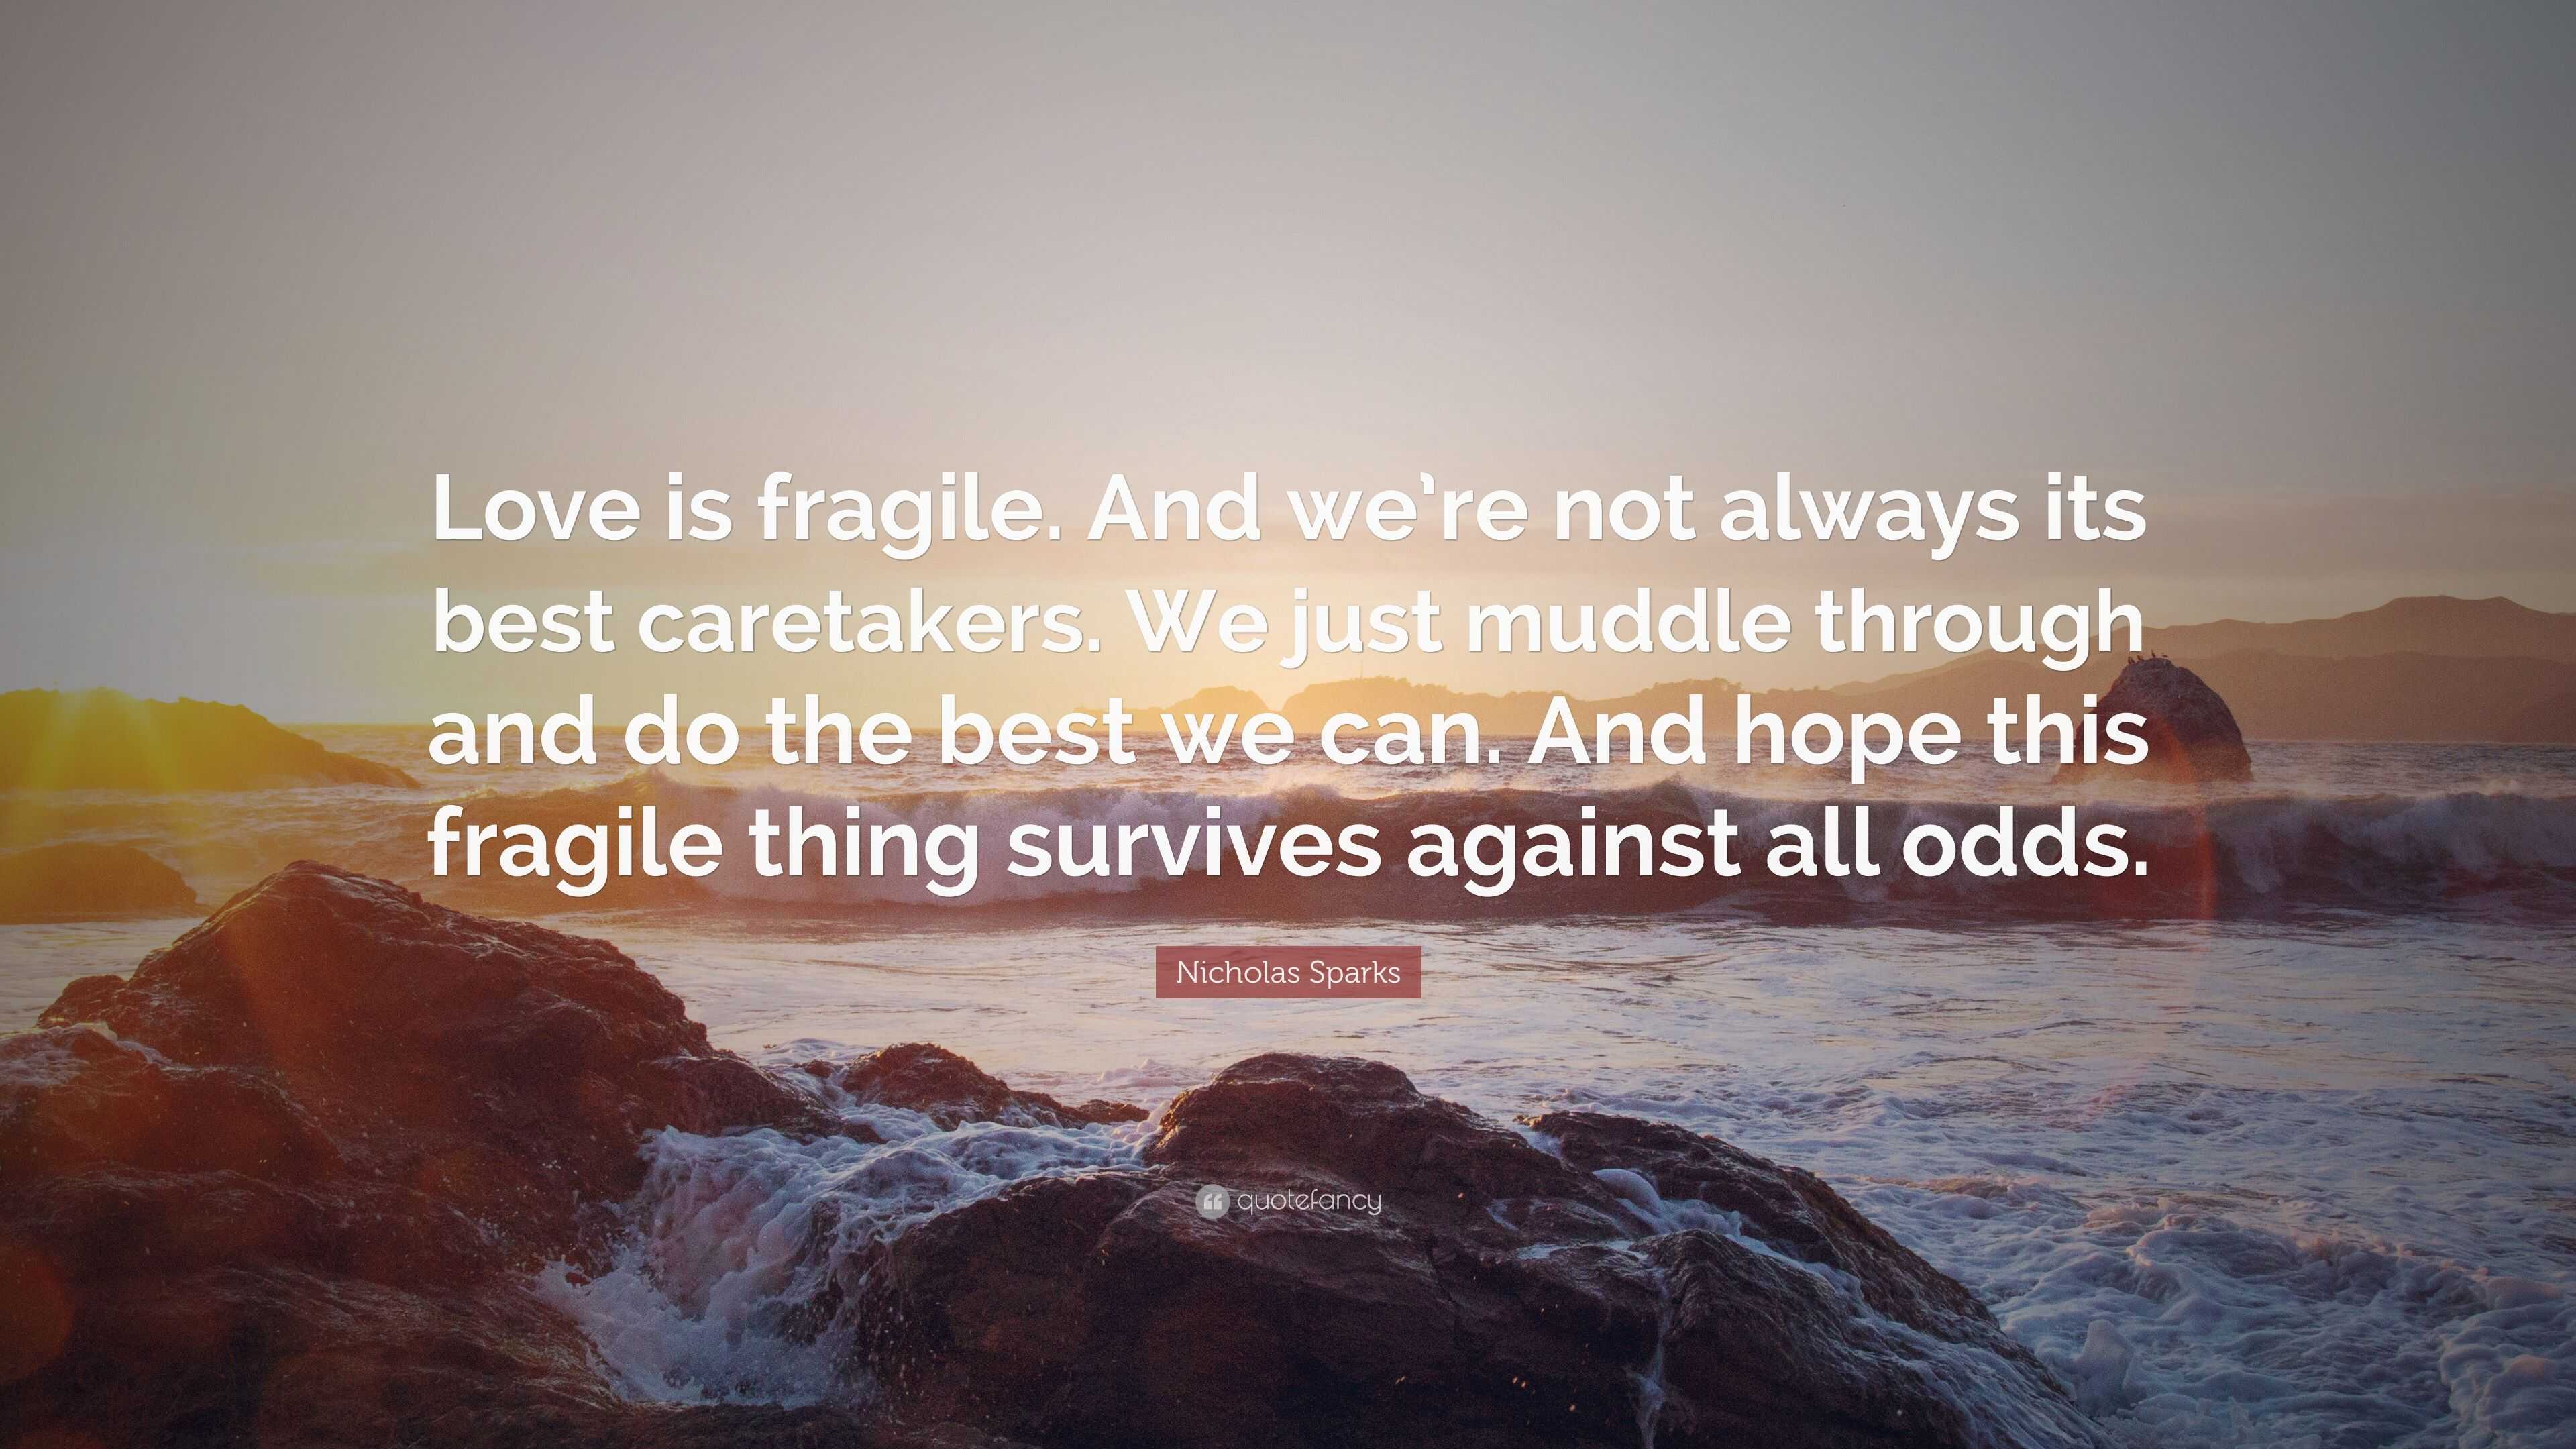 Nicholas Sparks Quote “Love is fragile And we re not always its